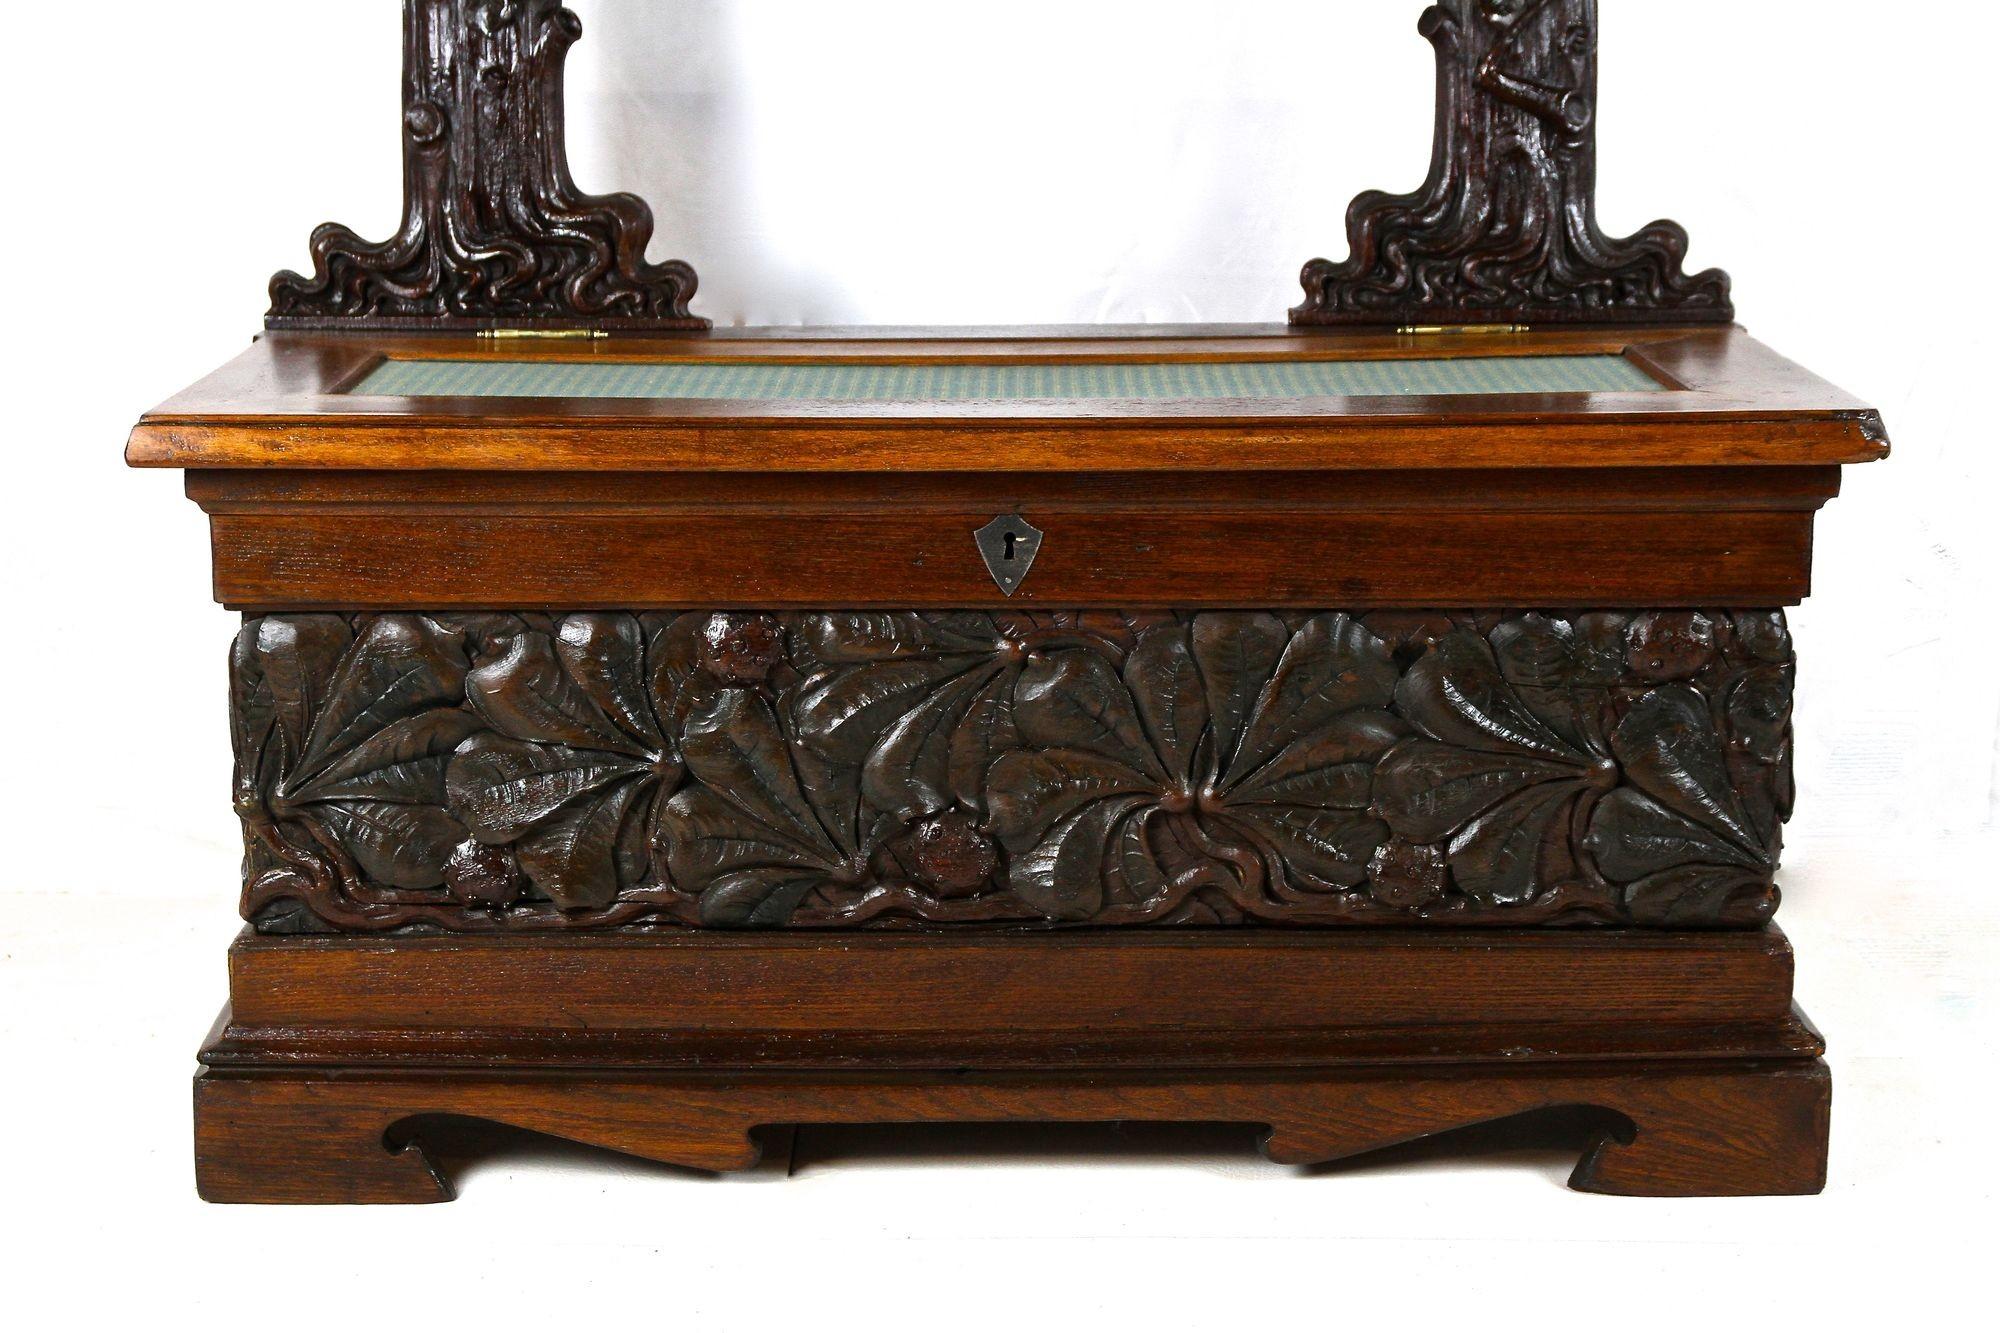 Art Nouveau 19th Century French Chest Bench With Chestnut Tree Motif, France ca. 1890/1900